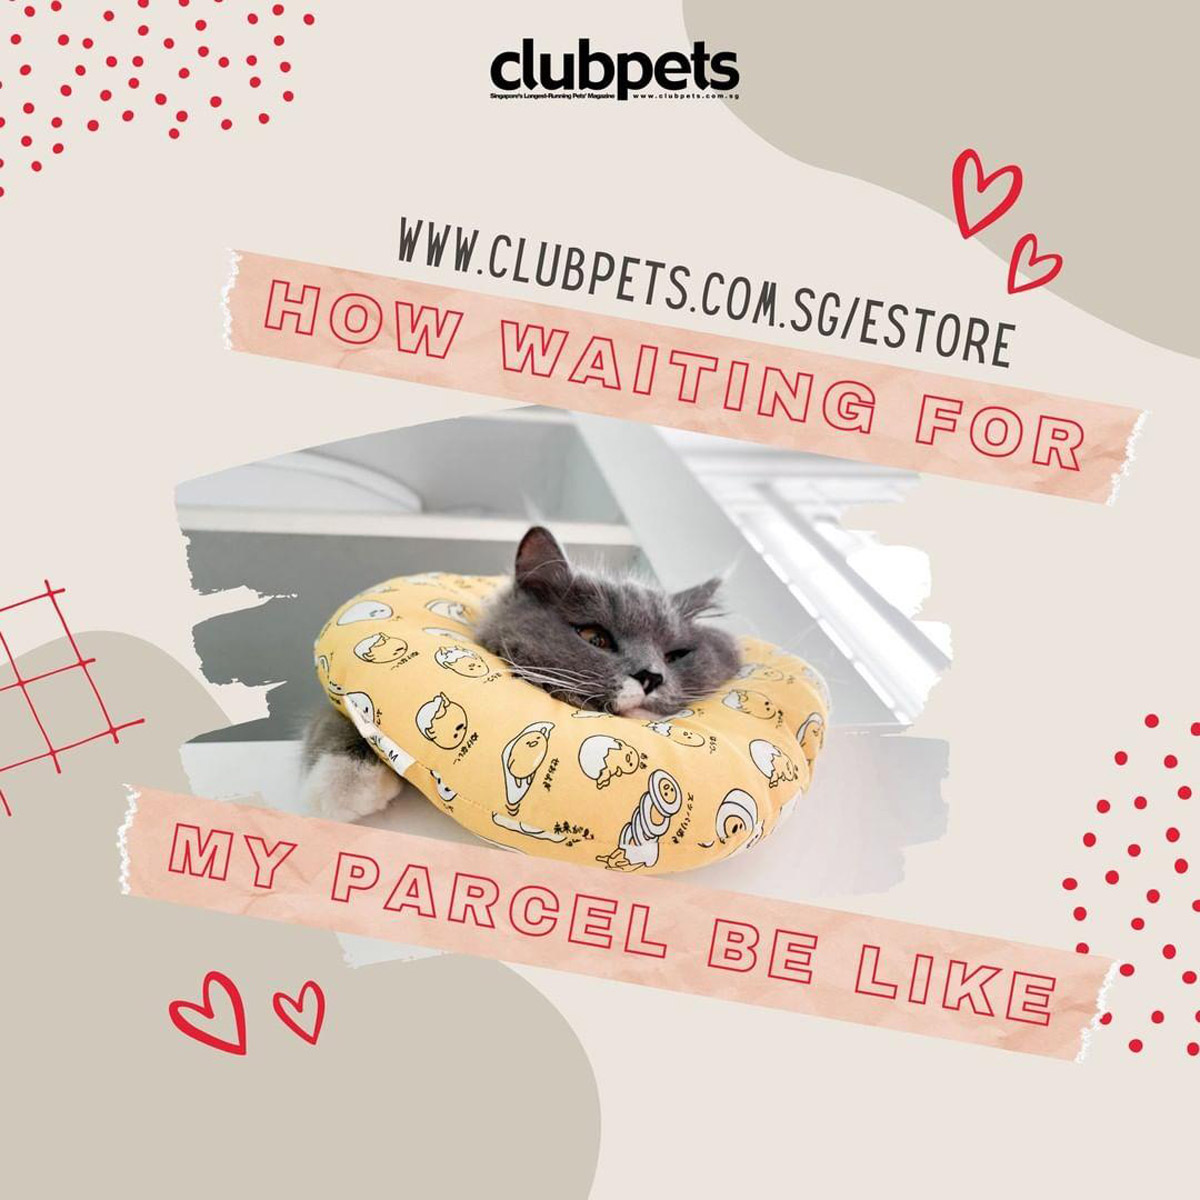 5 Irresistible Perks of Shopping Online at Clubpets’ E-Store for Pet Food, Pet Accessories & More!